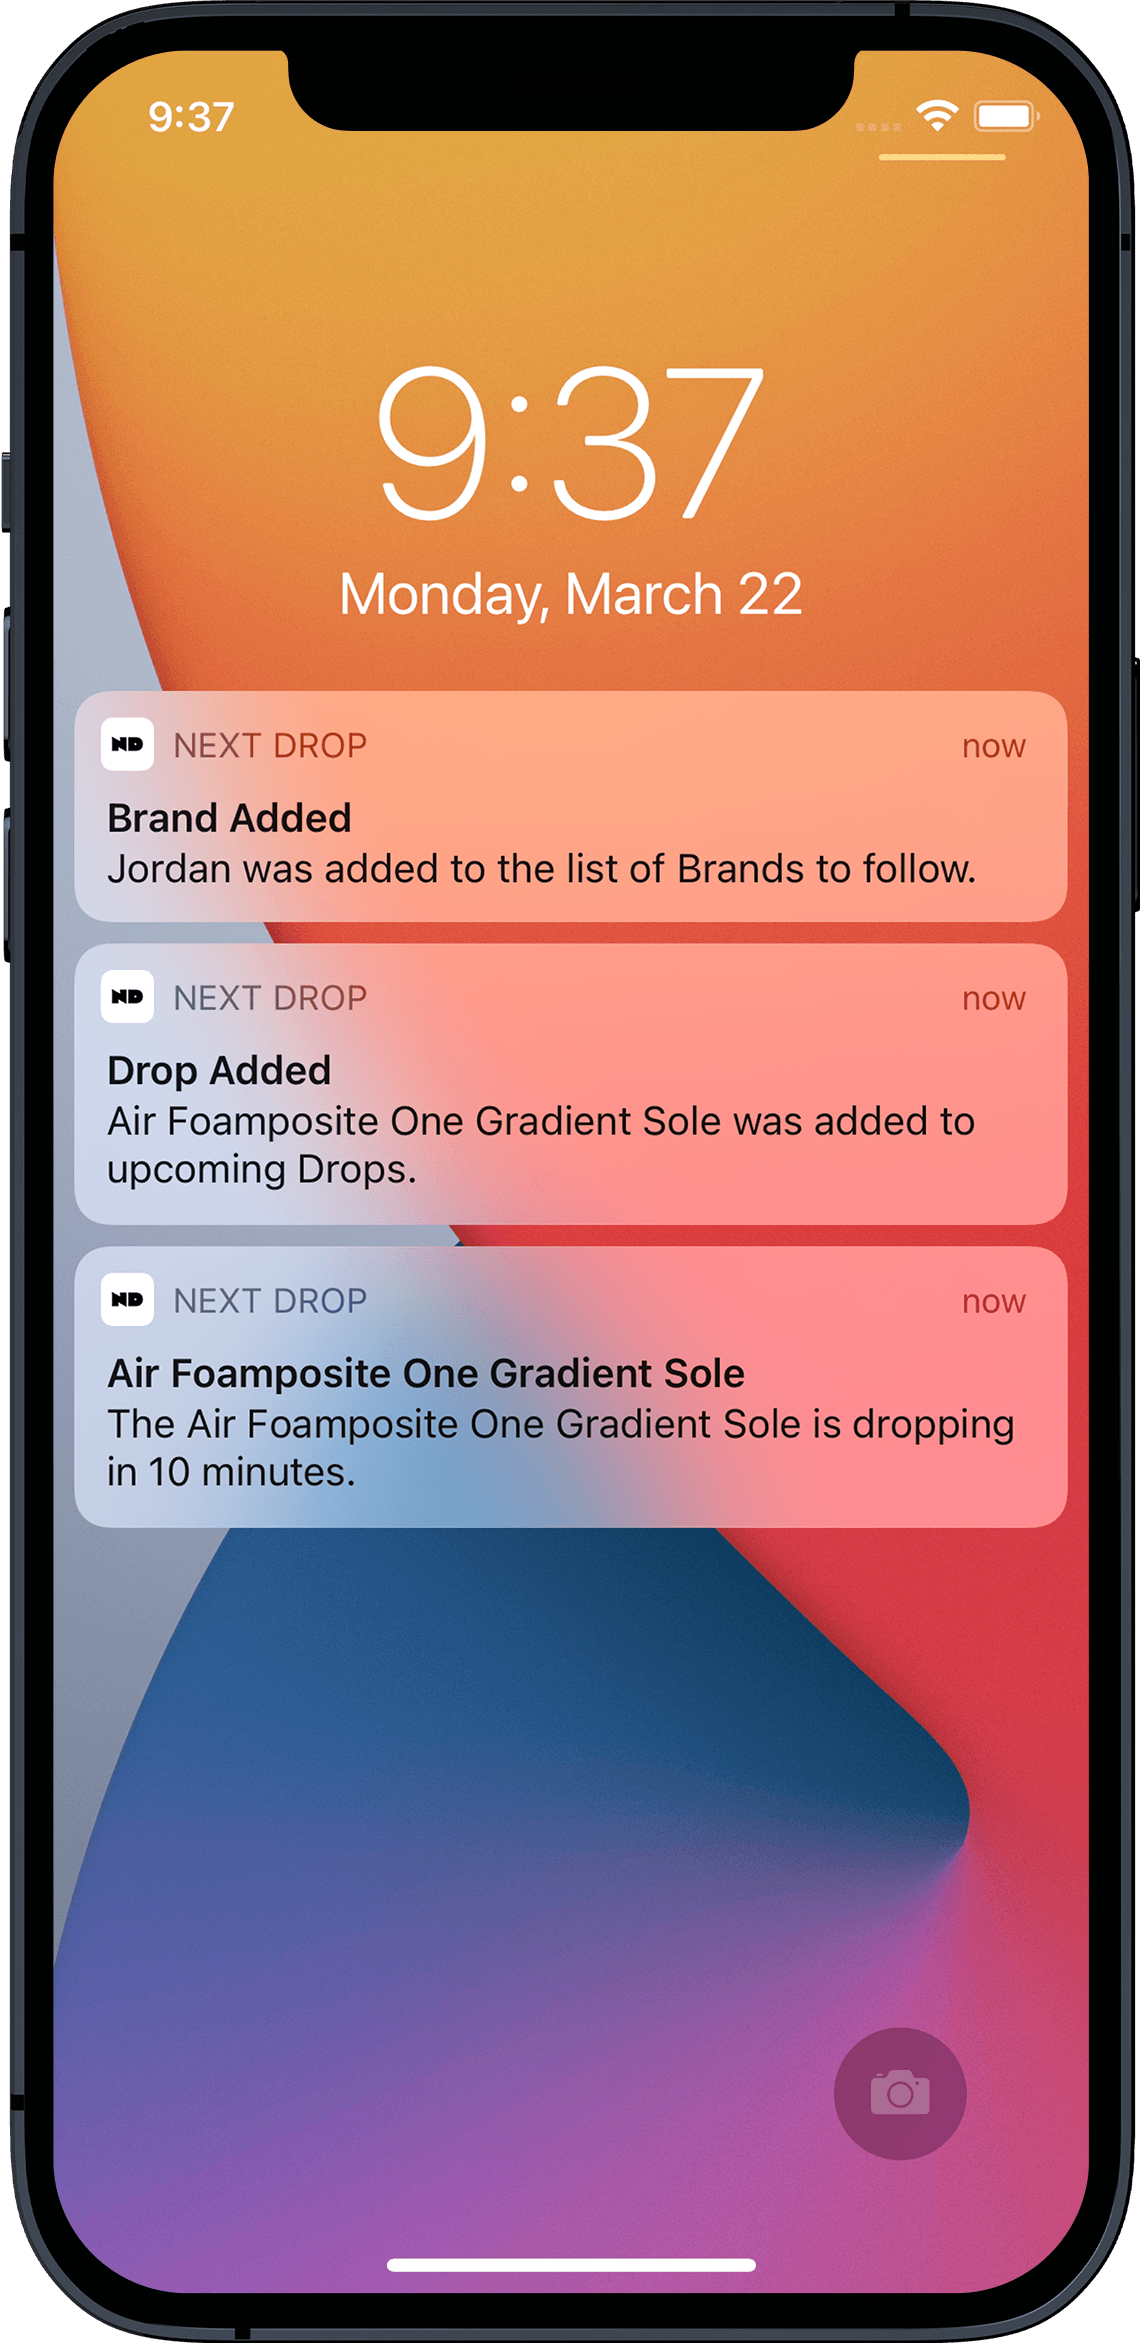  Mockup of Next Drop running on the iPhone